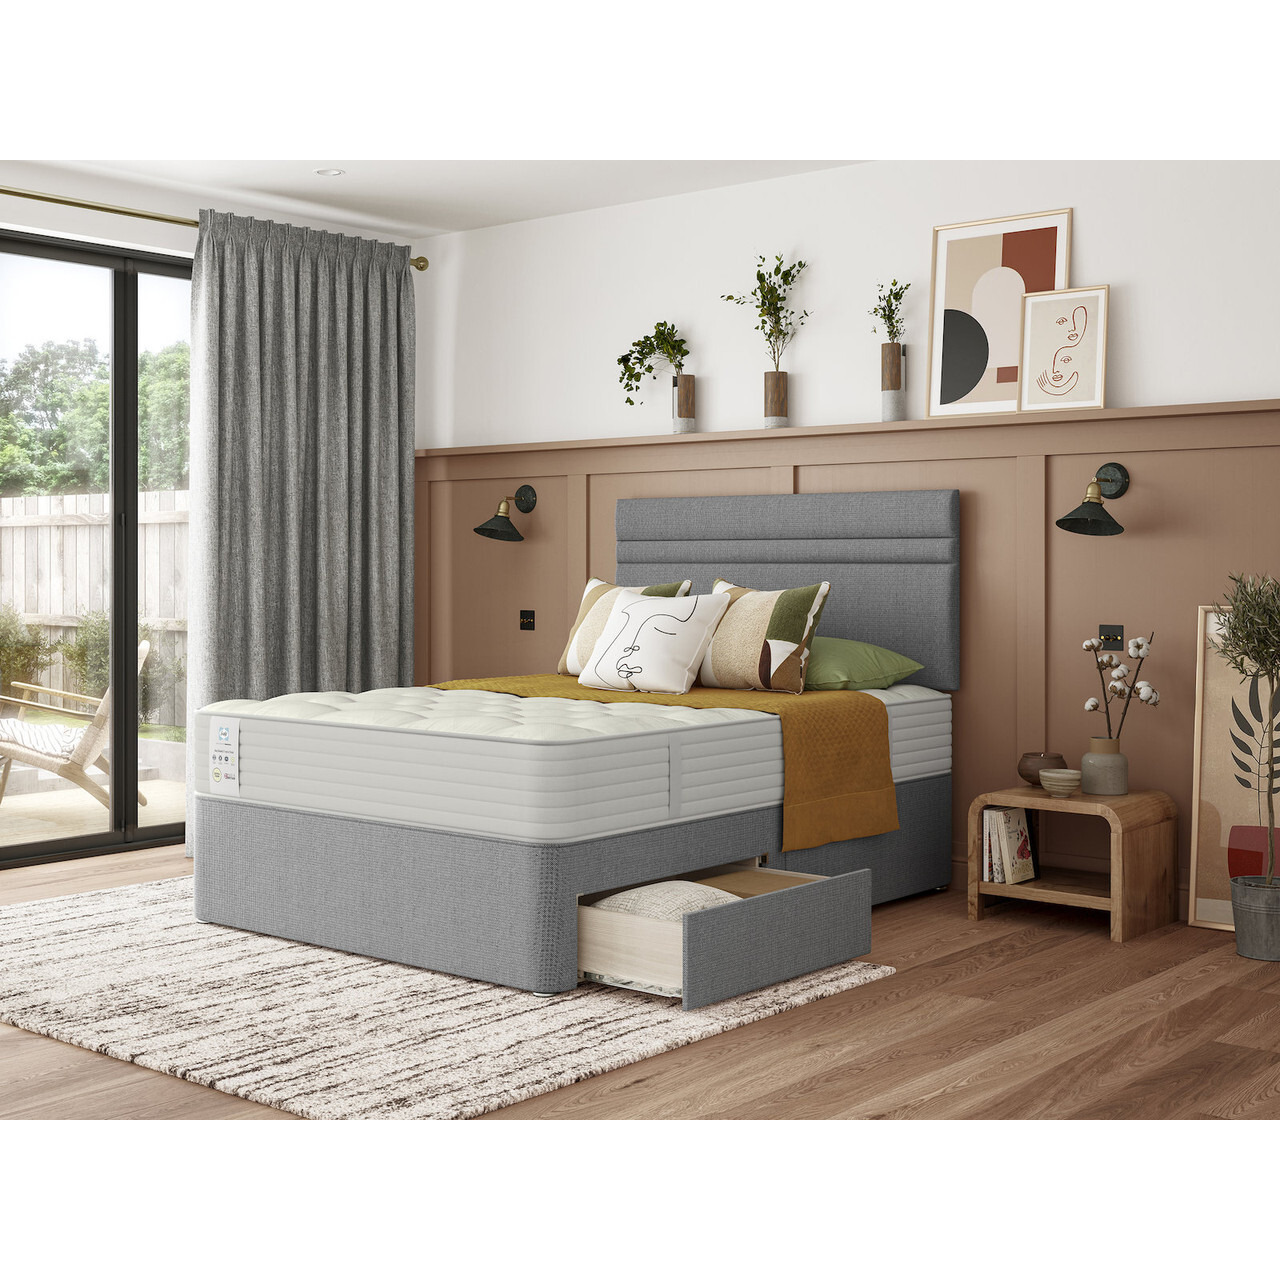 Sealy Auckland Firm Support Divan Bed Set - image 1